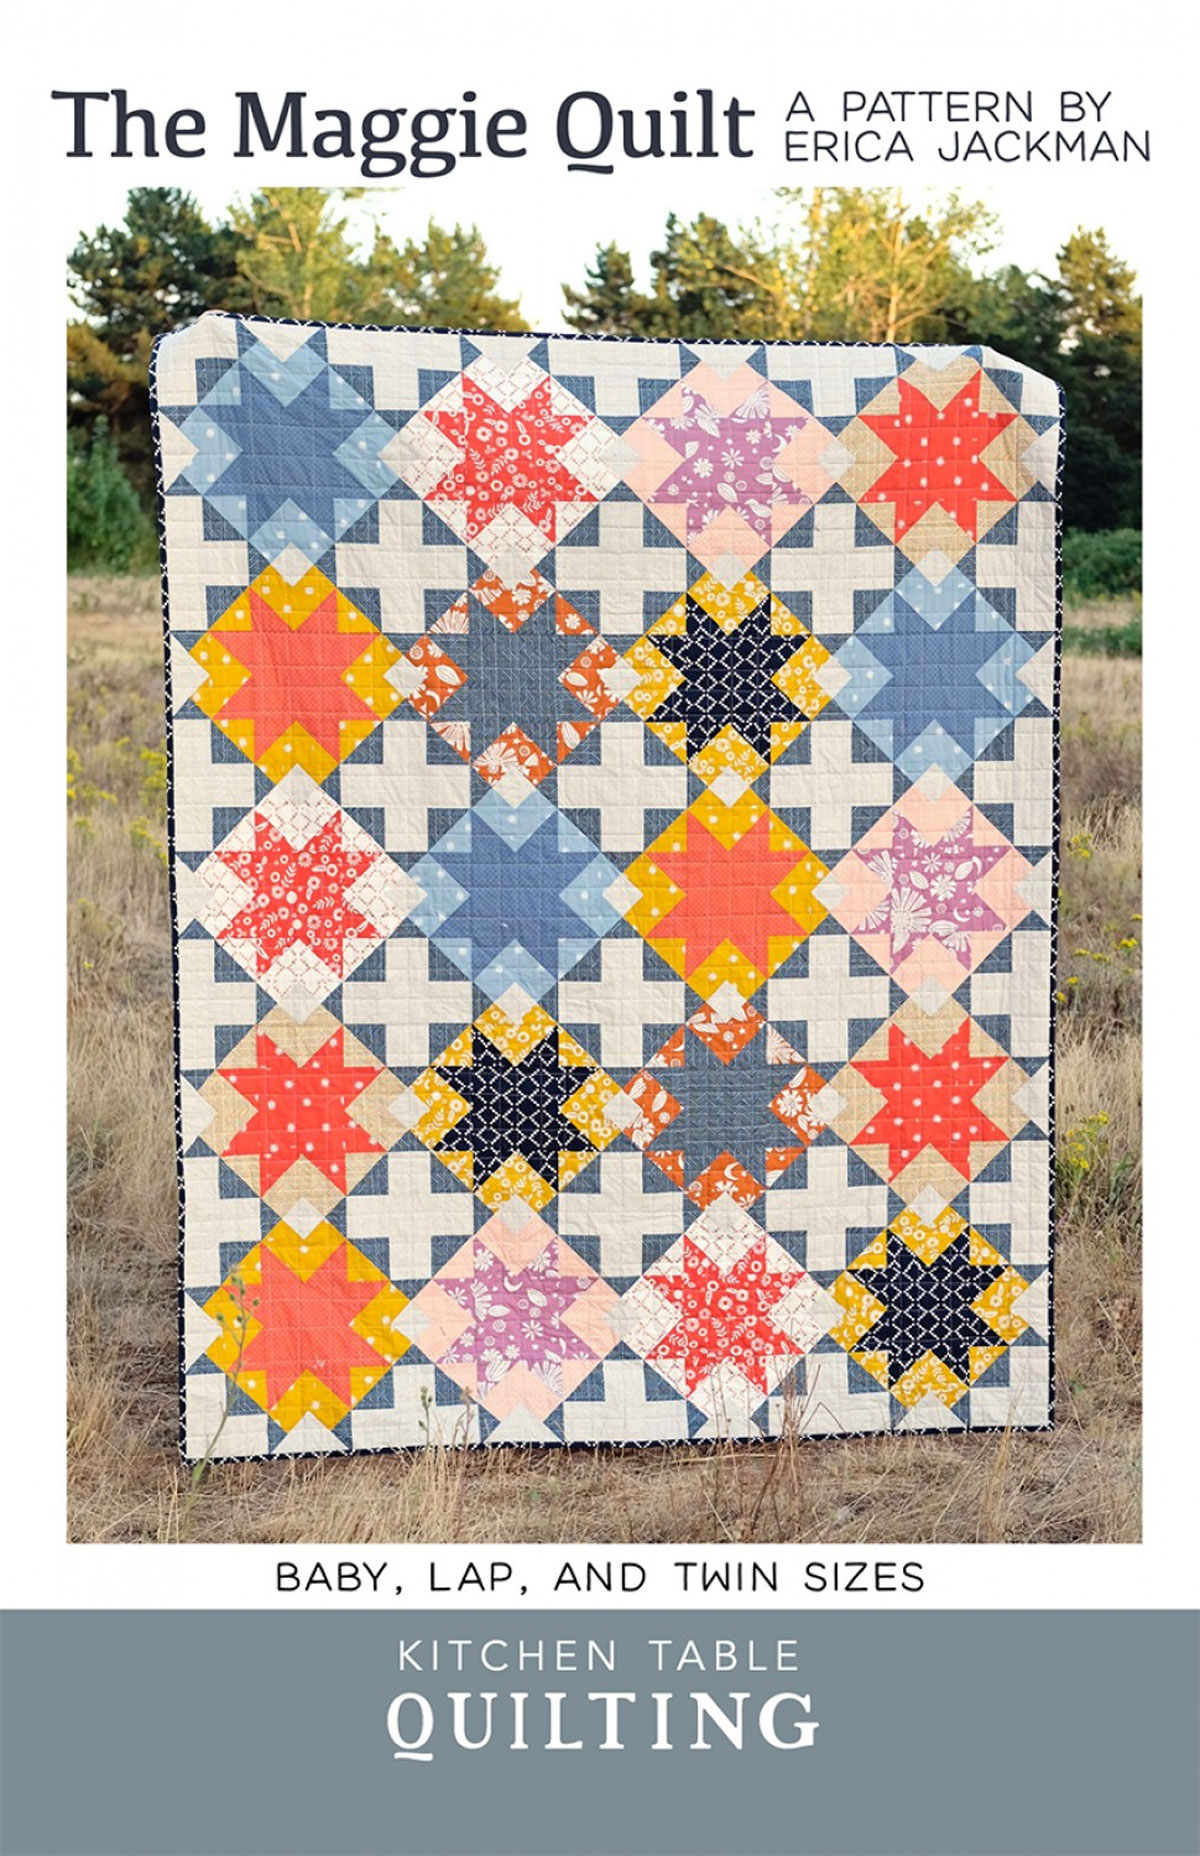 The-Maggie-quilt-sewing-pattern-Kitchen-Table-Quilting-Erica-Jackman-front